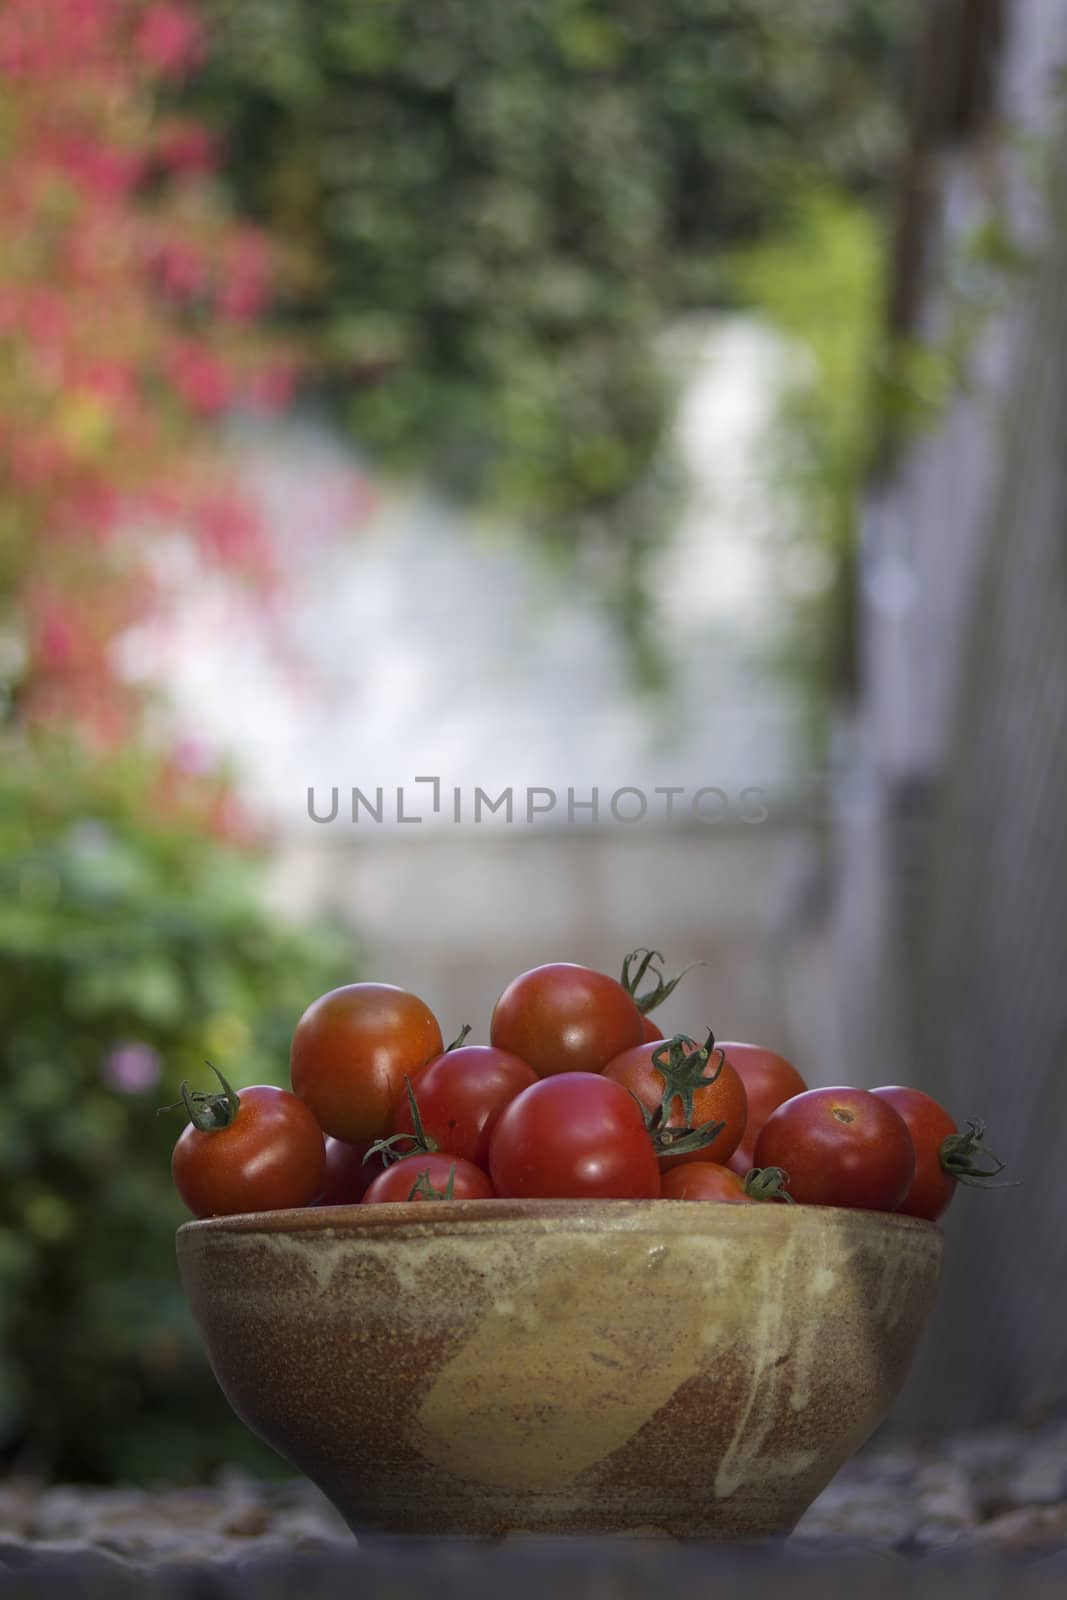 A bowl of small red tomatoes in a brown ceramic bowl set against a soft focus garden background. Shot on a portrait format with room for copy etc above.